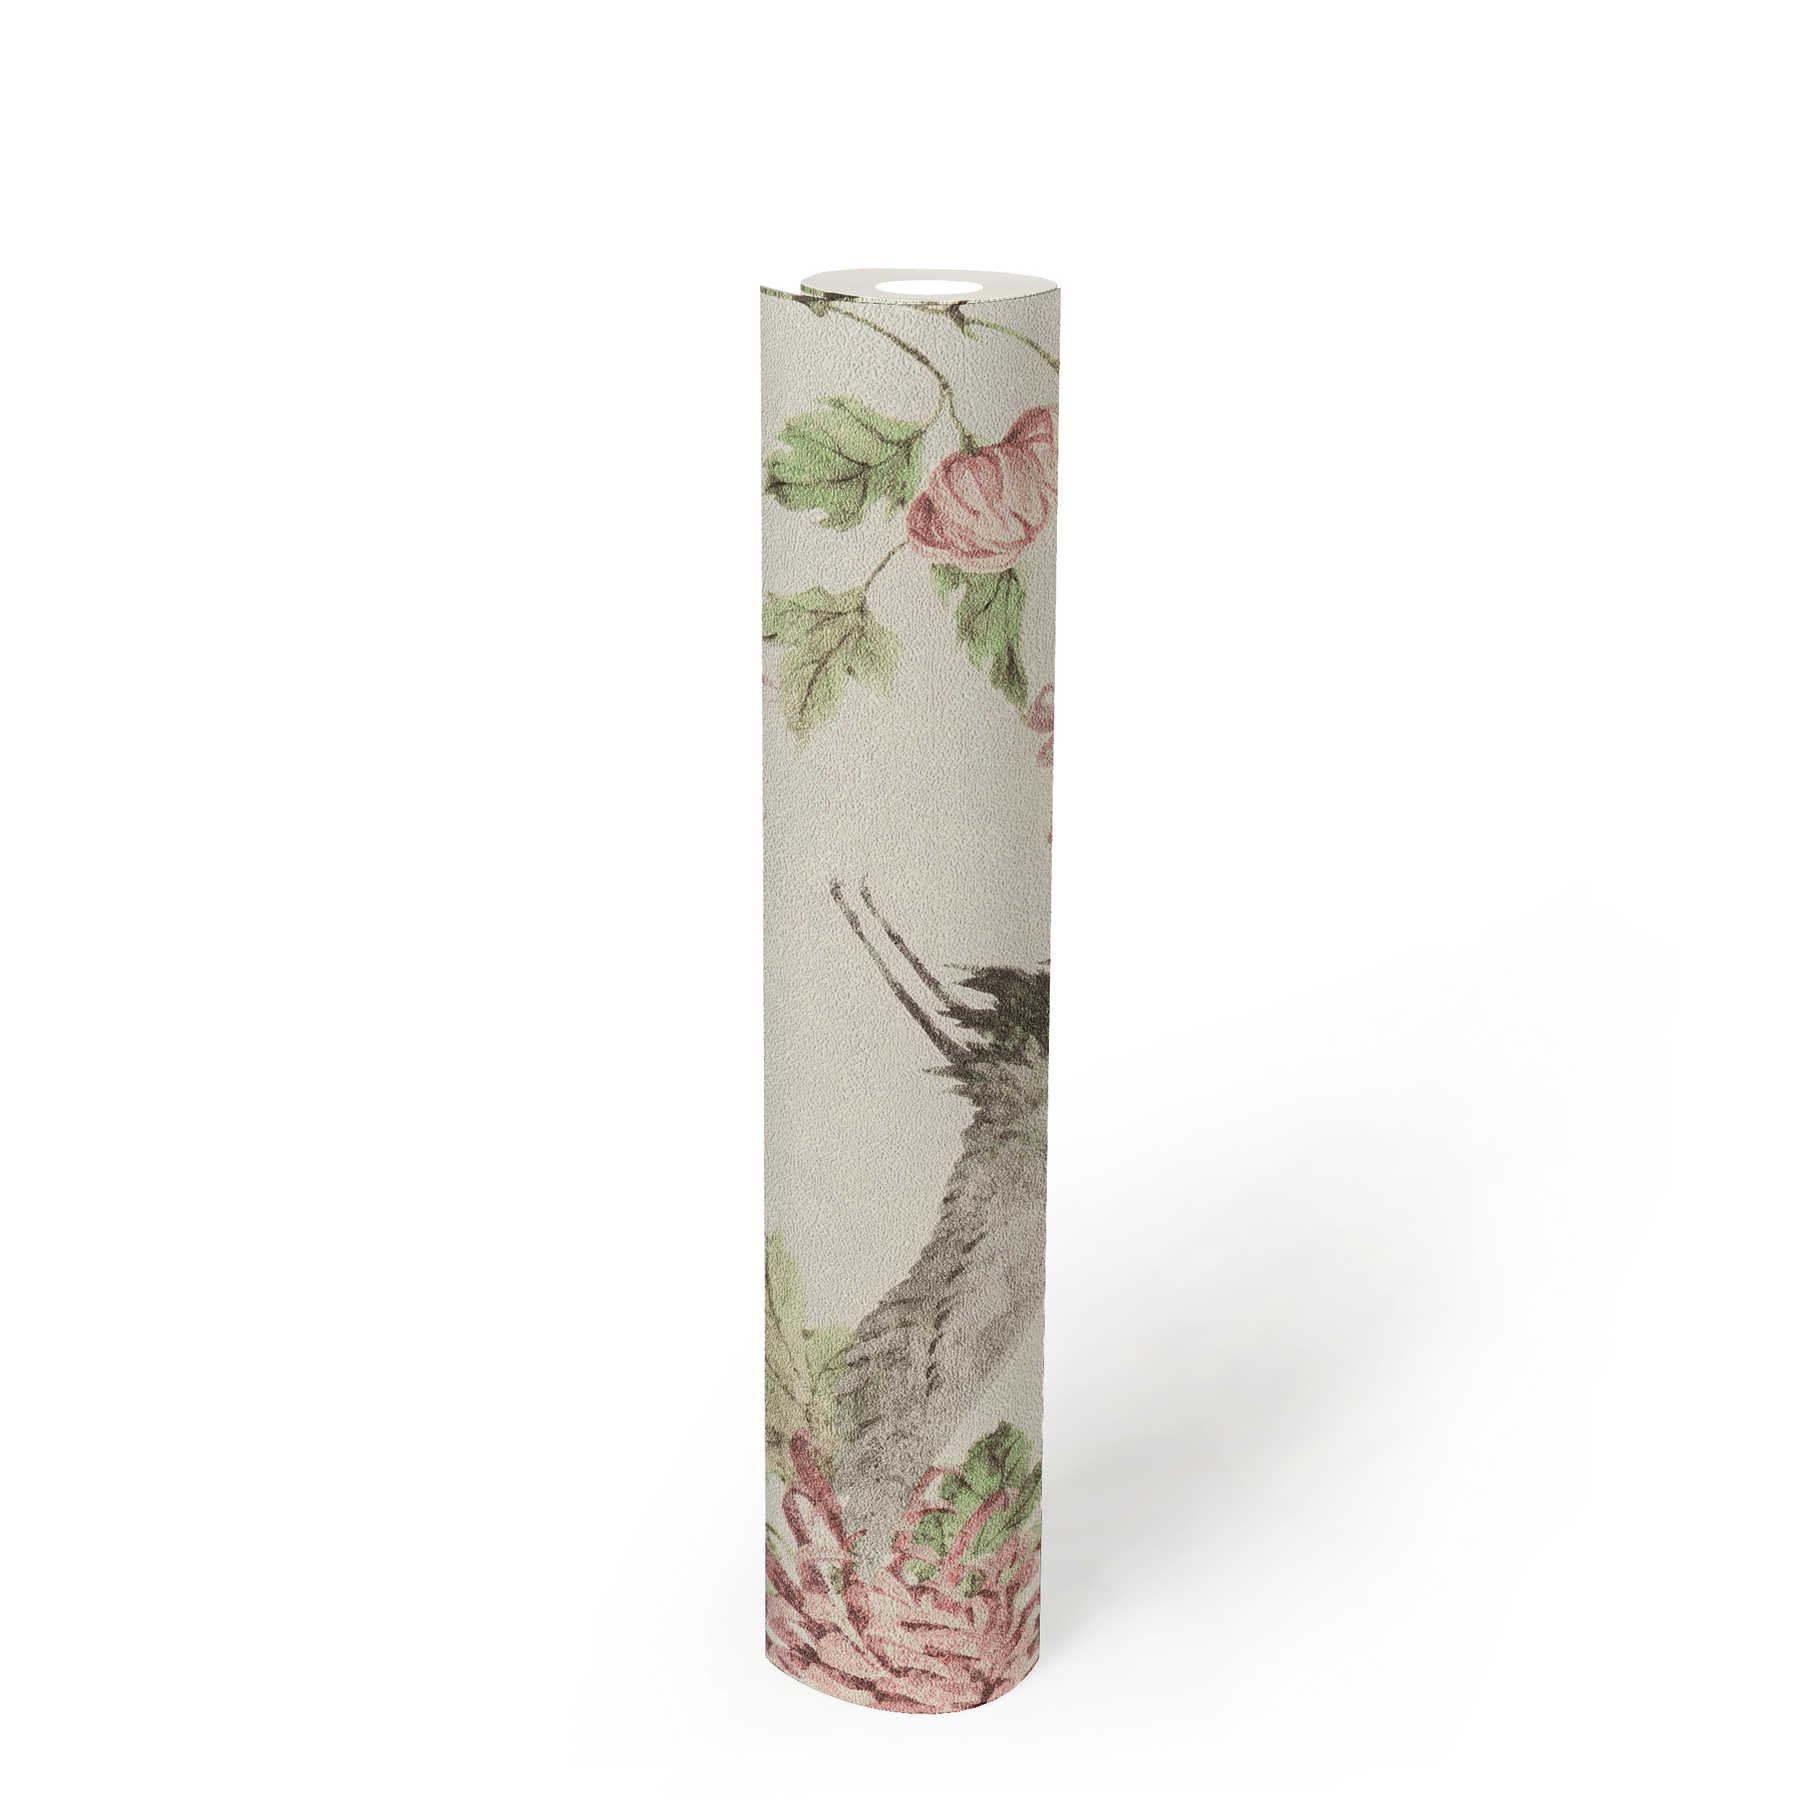             Pattern wallpaper with Asian crane and flower motif - pink, green, white
        